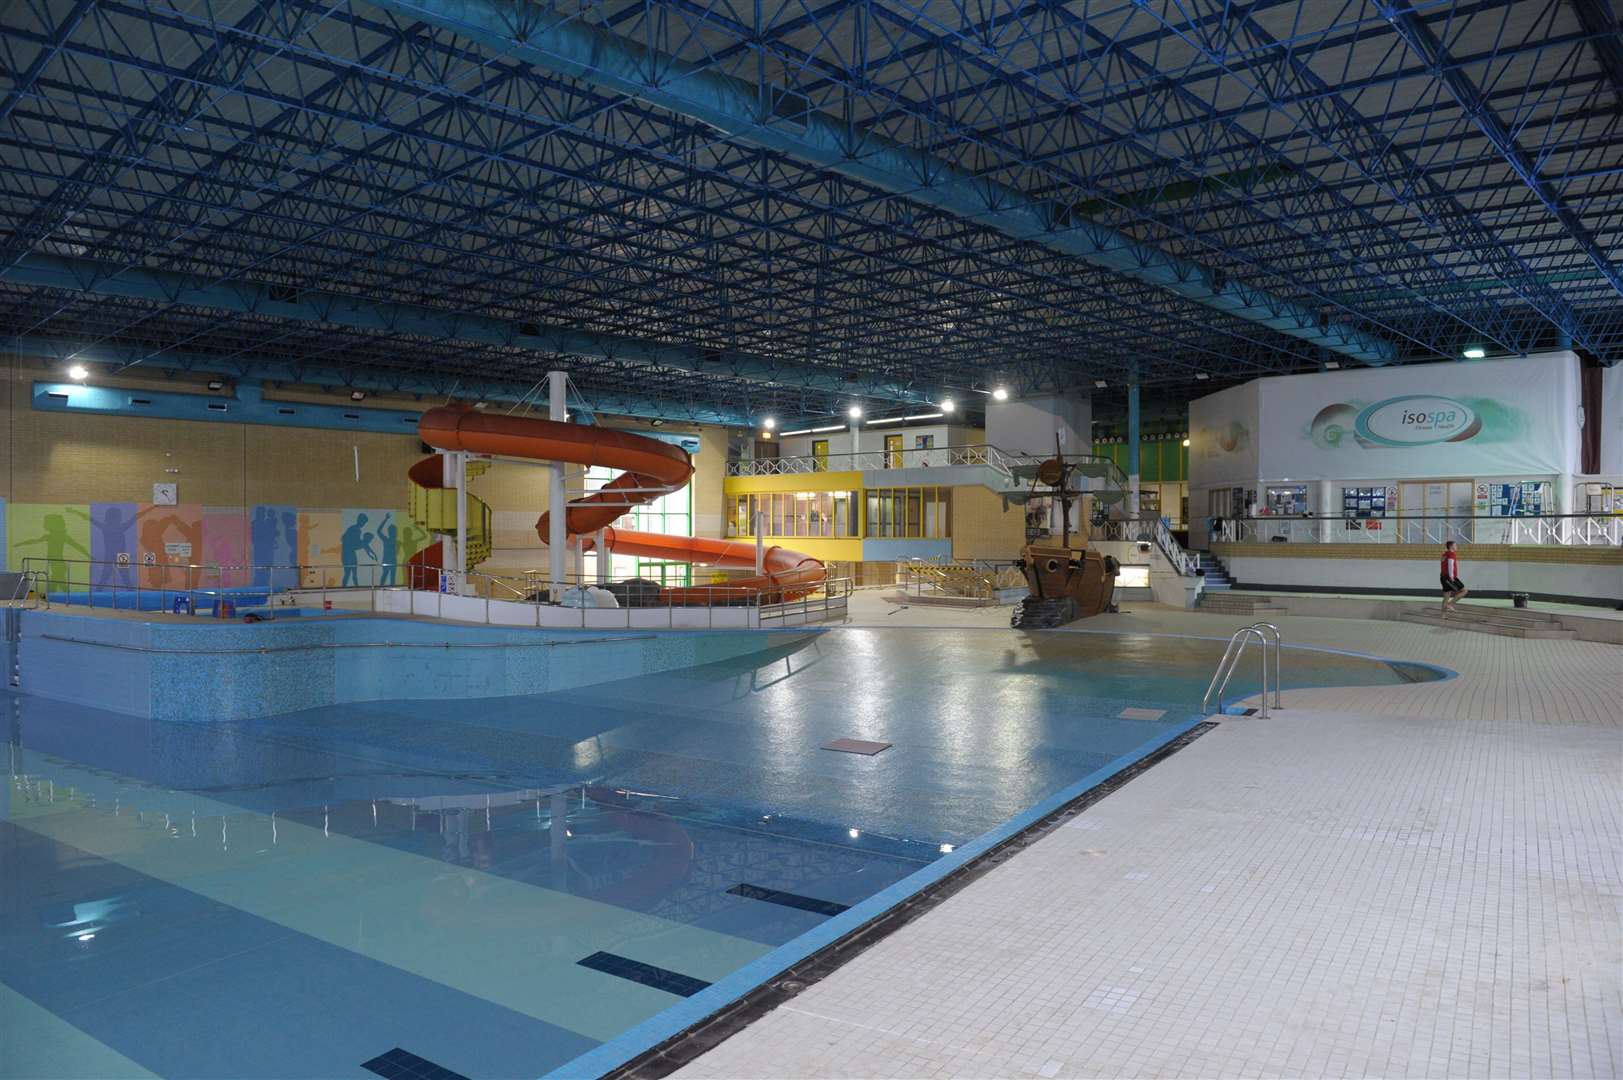 The pool at Swallows Leisure Centre. Picture: Steve Crispe